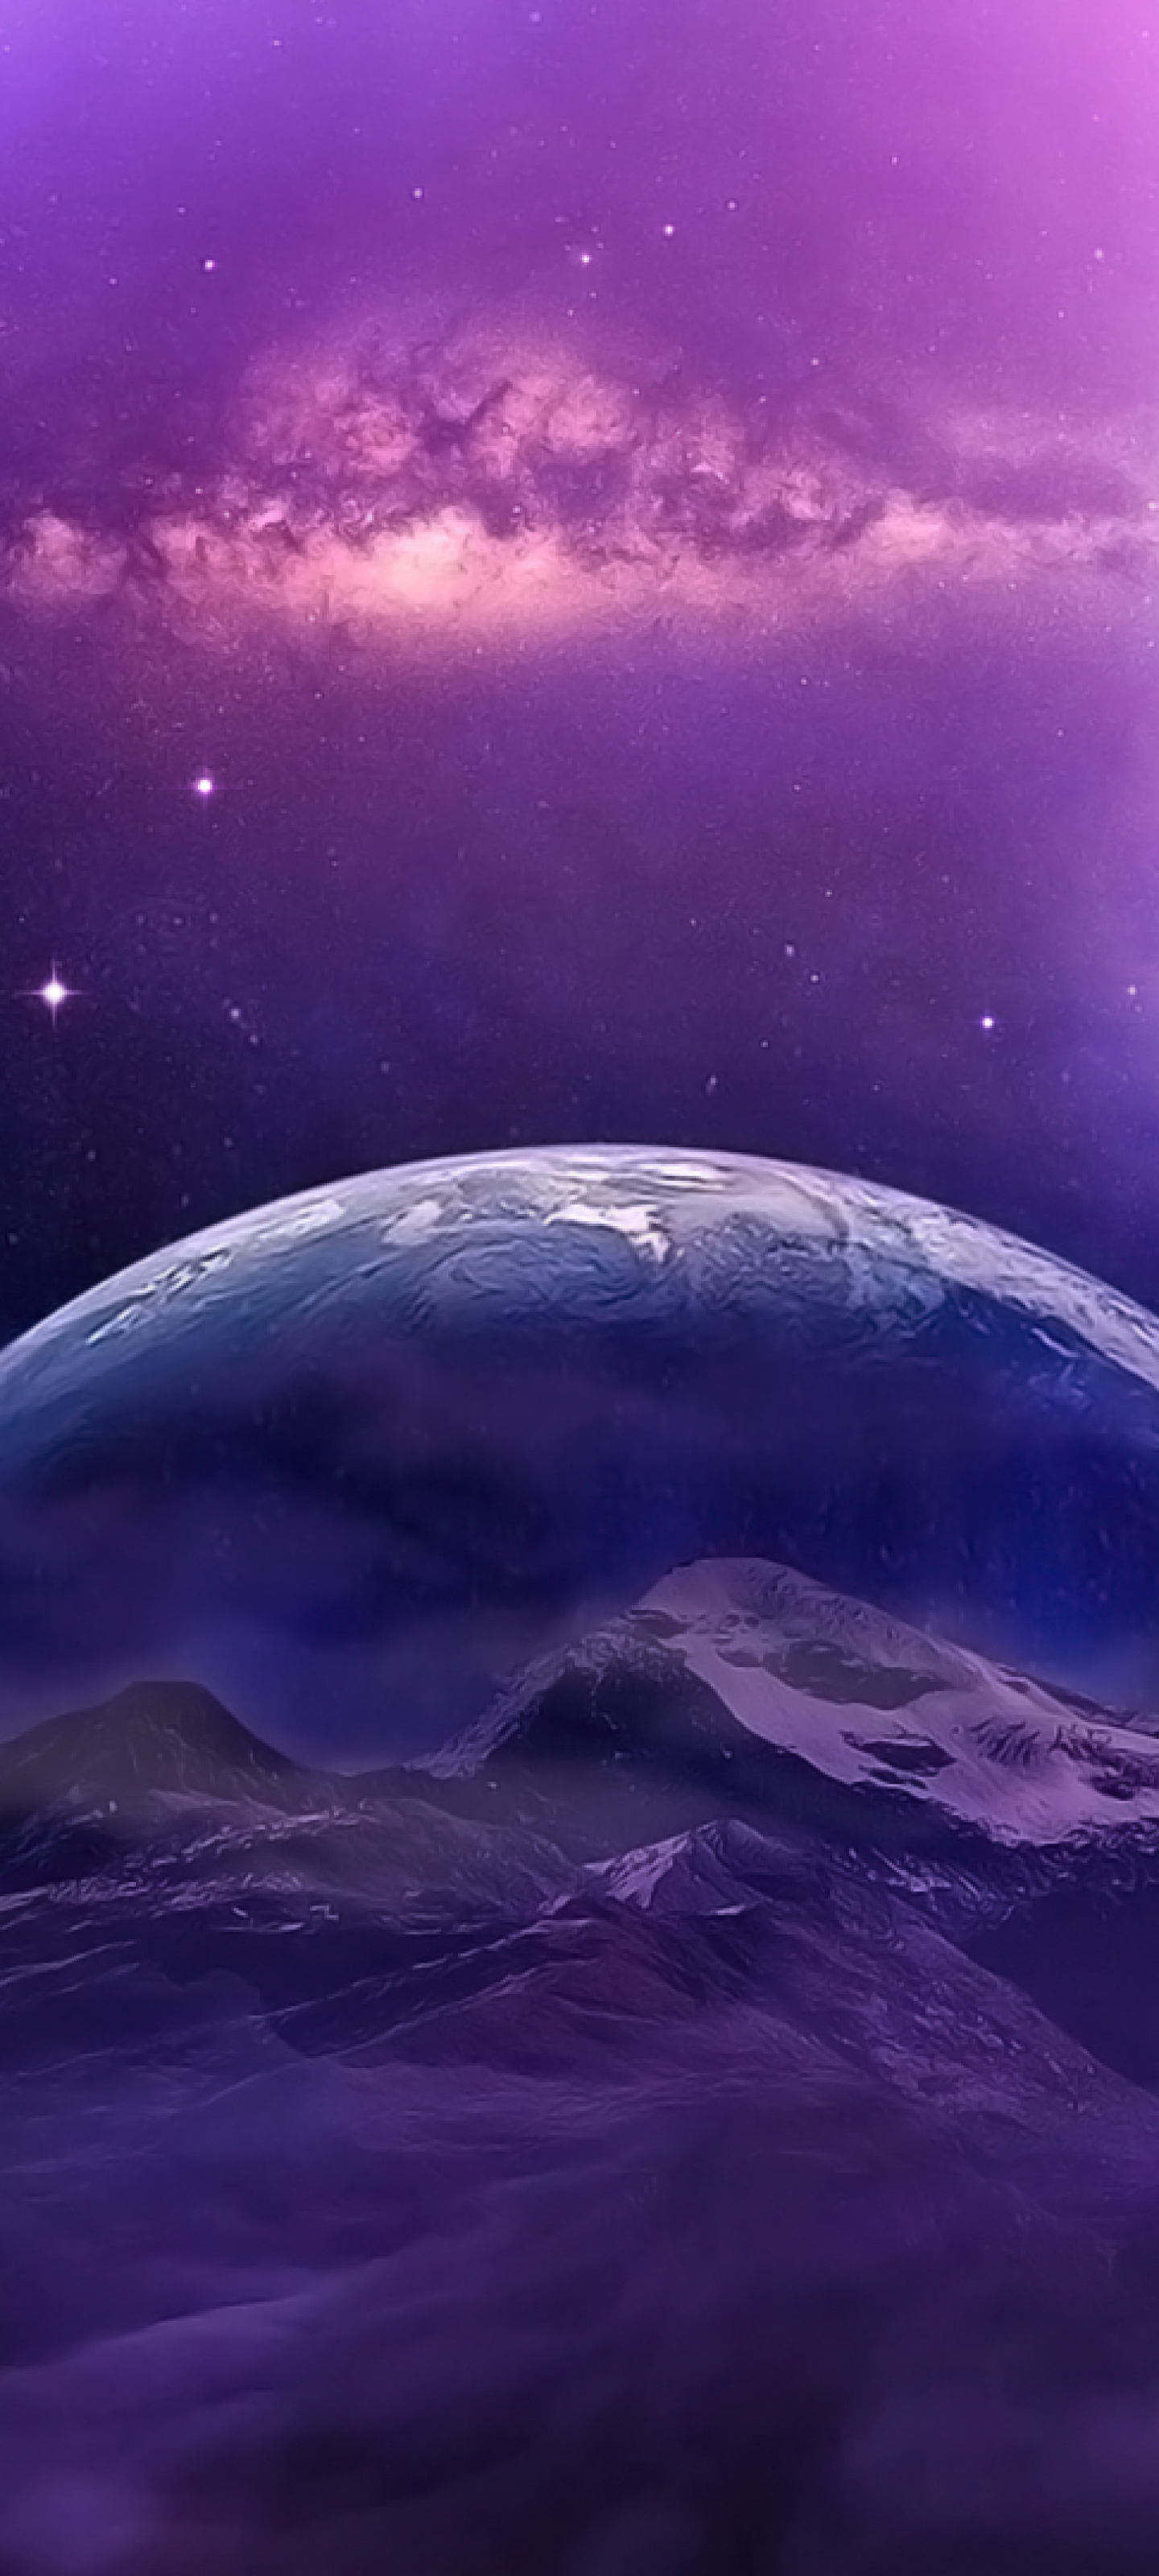 1440x3200 Mountains And Cosmo Planets 1440x3200 Resolution Wallpaper